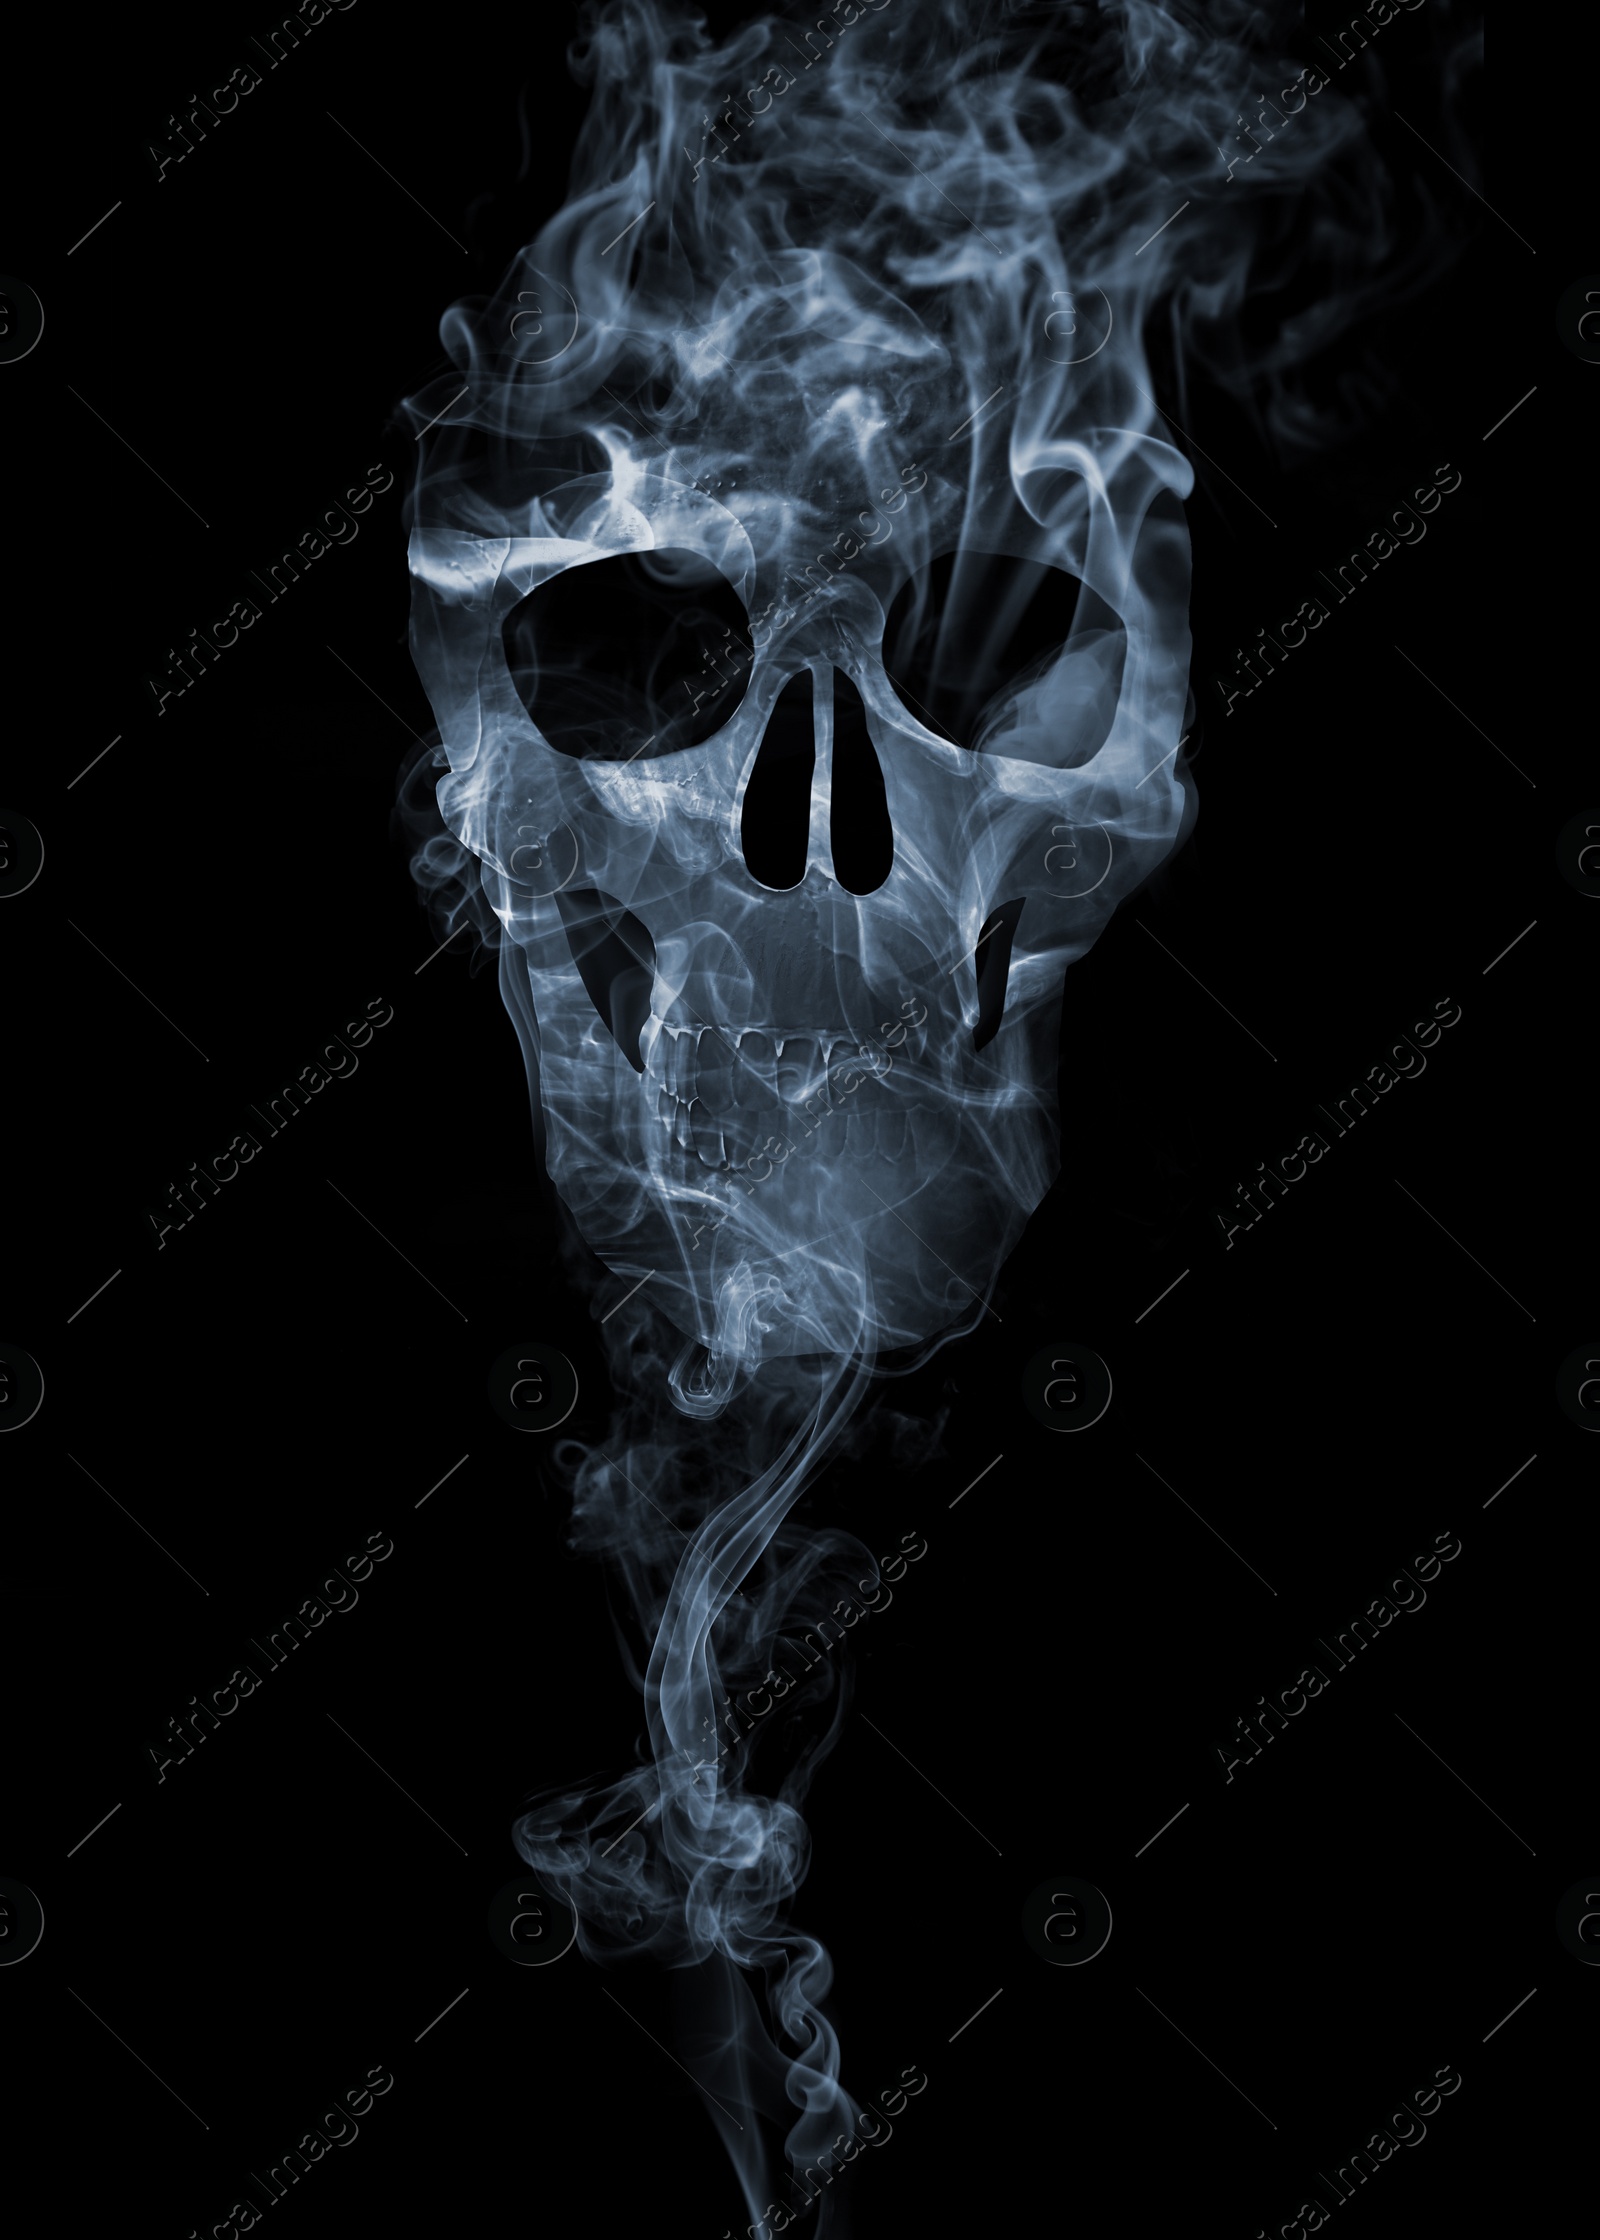 Image of Silhouette of scary skull made of smoke in darkness